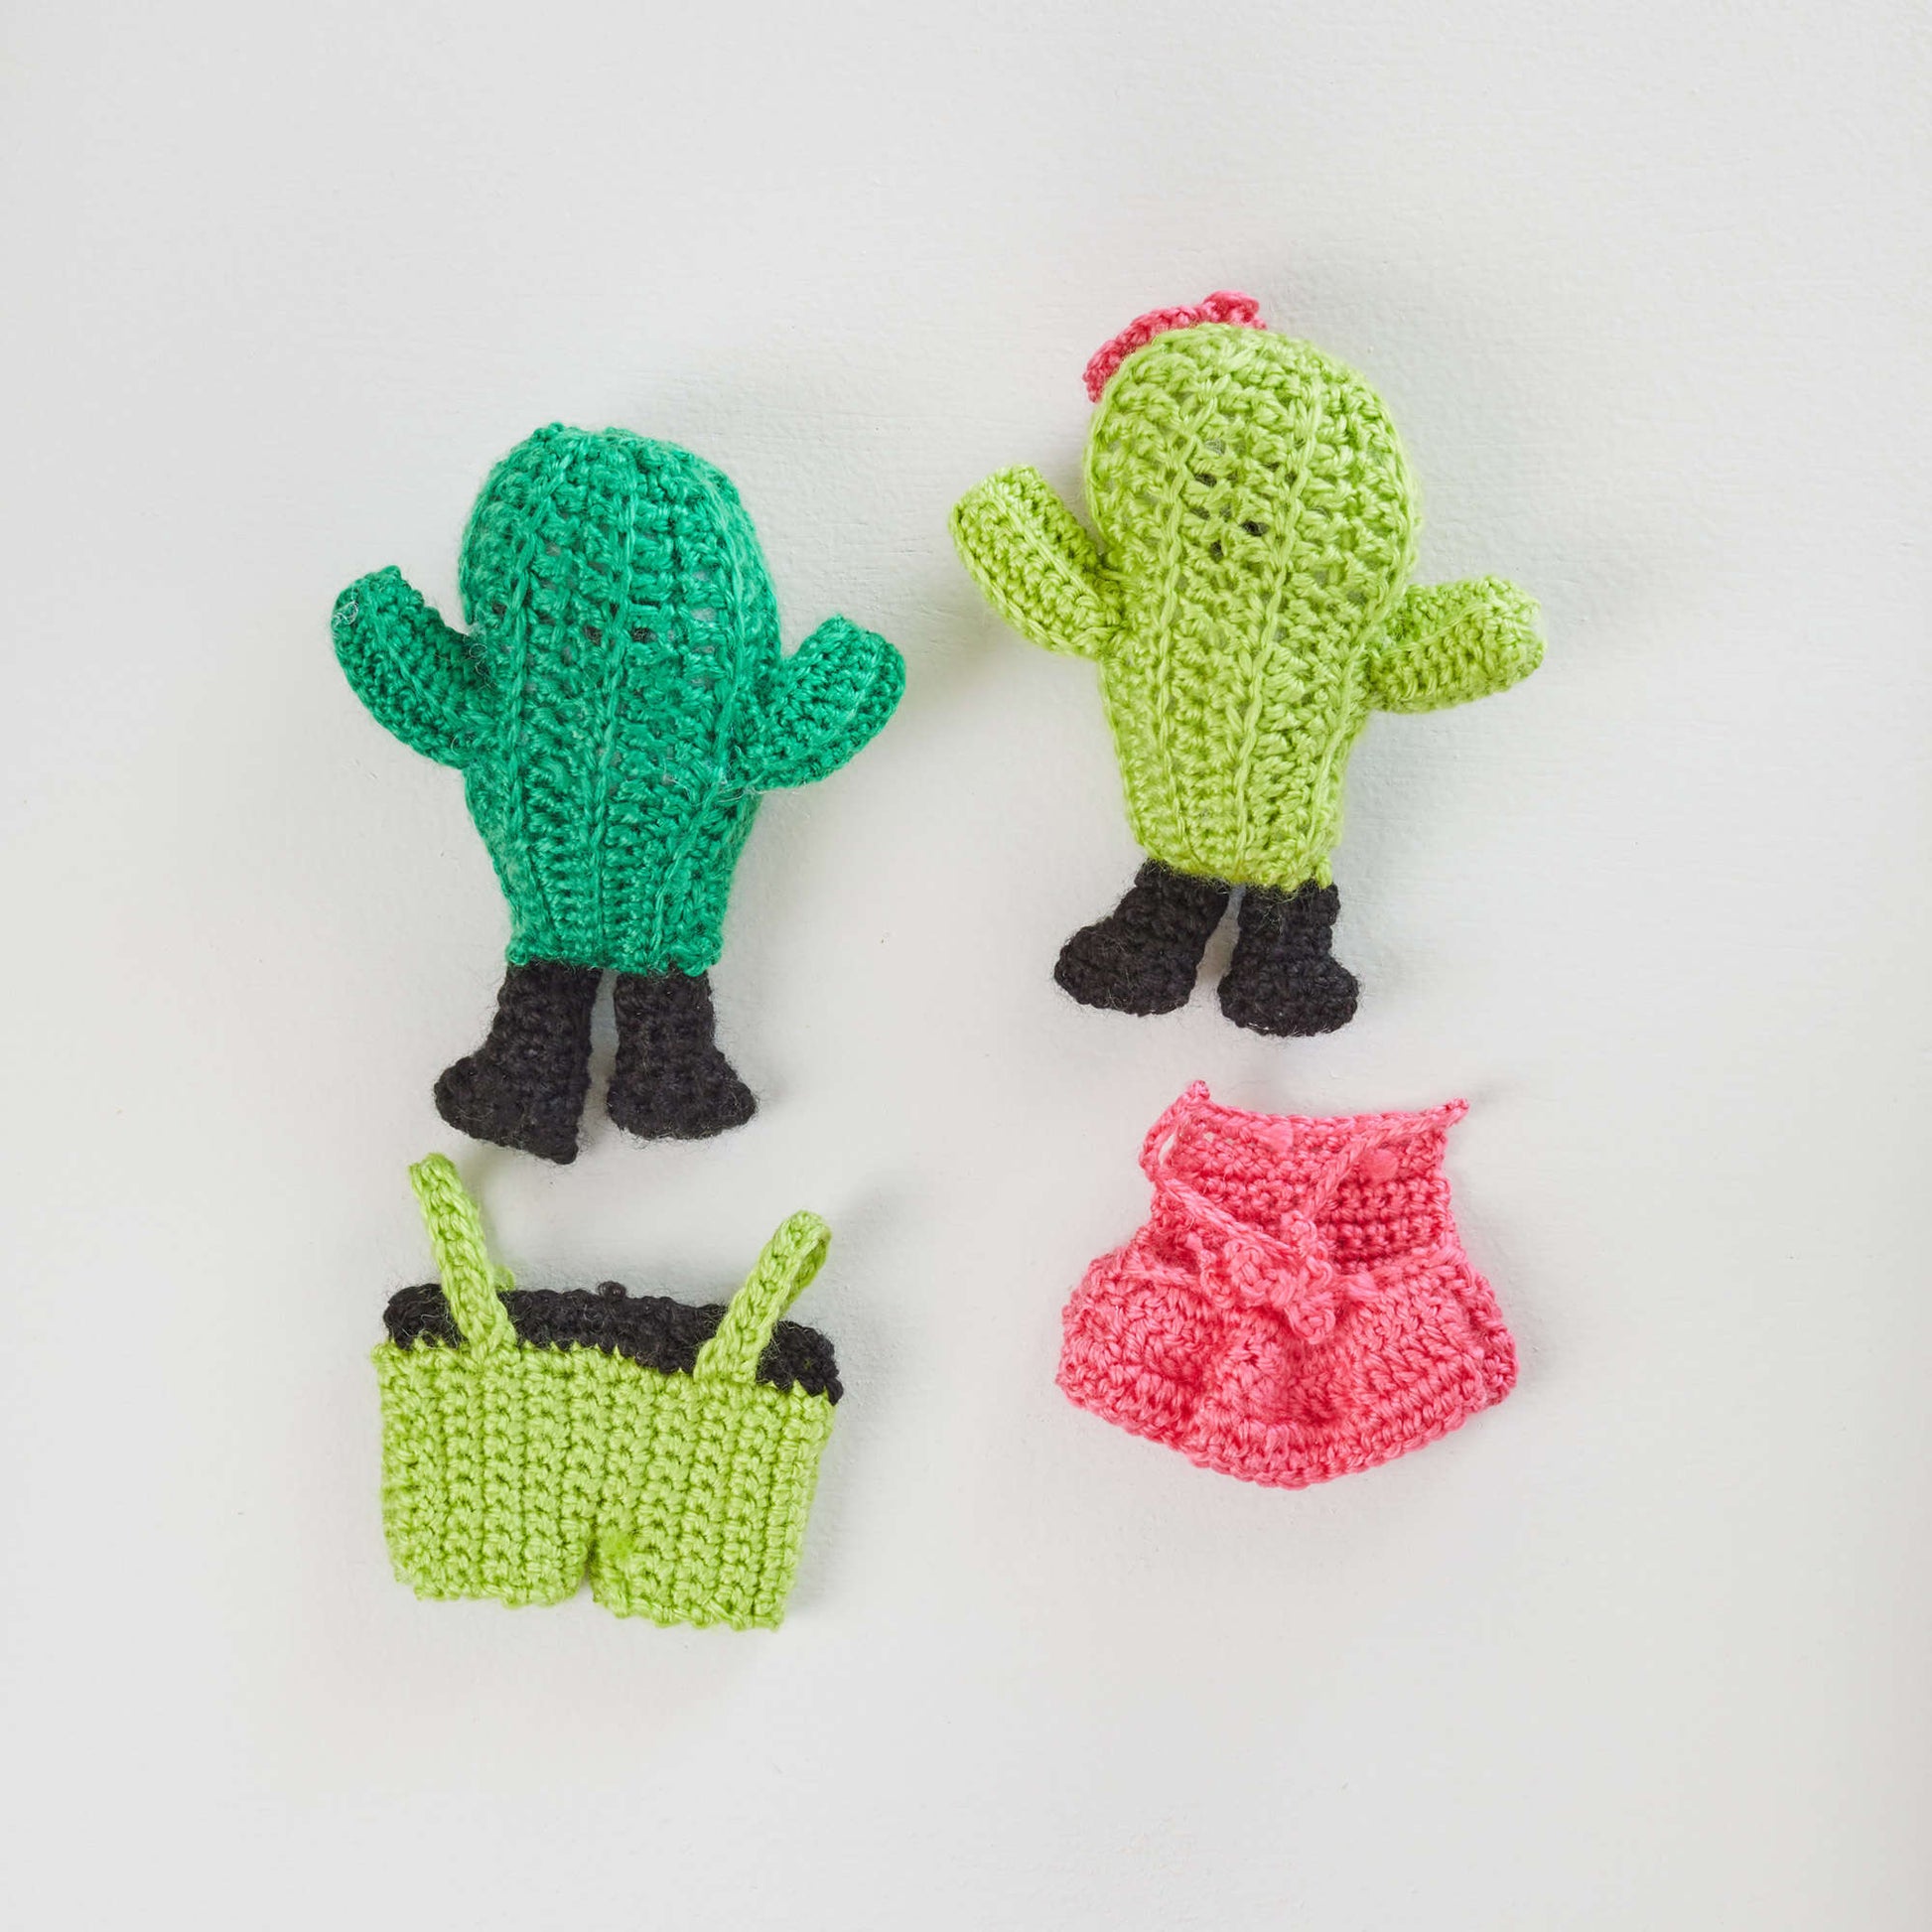 Free Red Heart Agave And Aloe Crochet Cactus Pattern